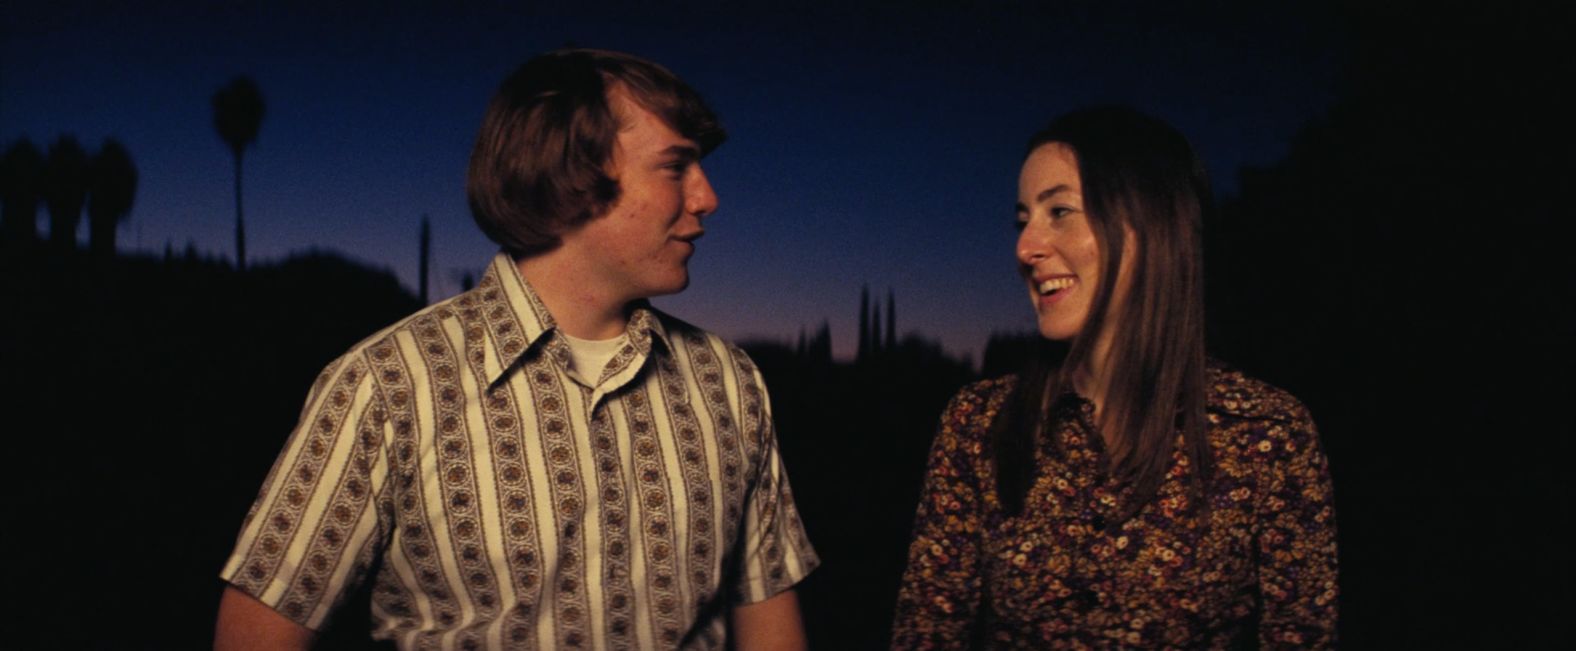 <strong>"Licorice Pizza"</strong>: Paul Thomas Anderson directs this story of two people growing up and falling in love in the San Fernando Valley in 1973. <strong>(Prime) </strong>